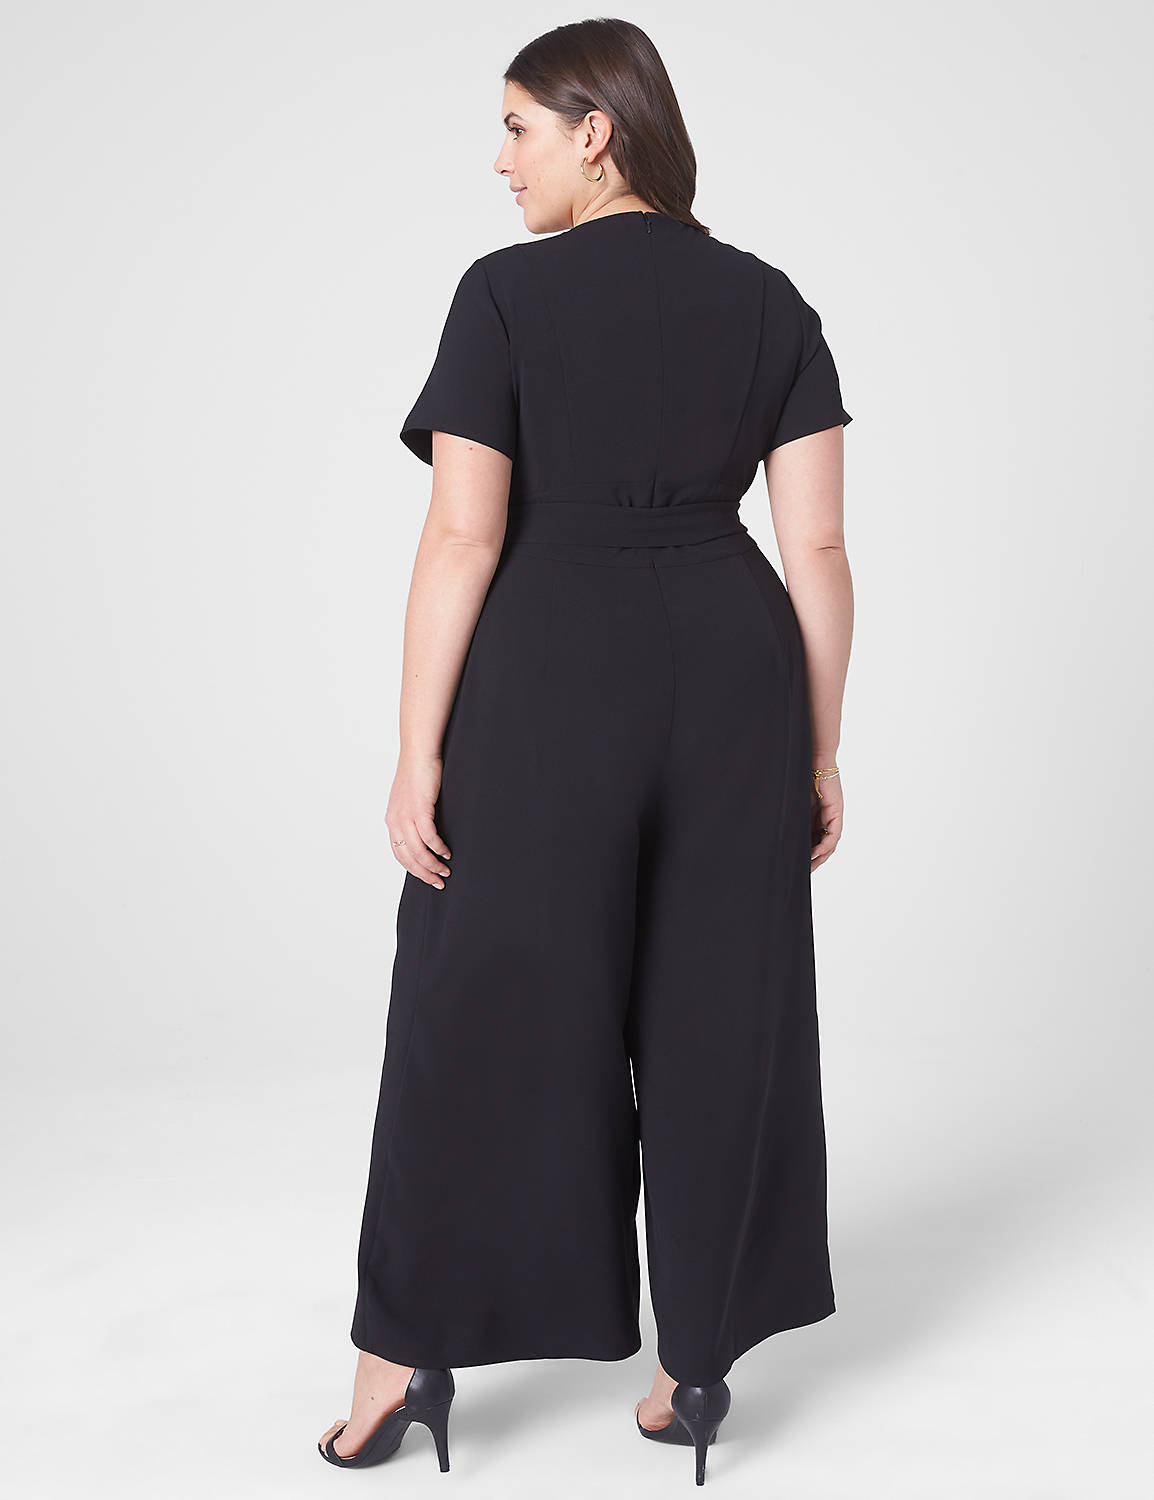 SS OPEN CREW NK ANKLE WIDE LEG LENA Product Image 2